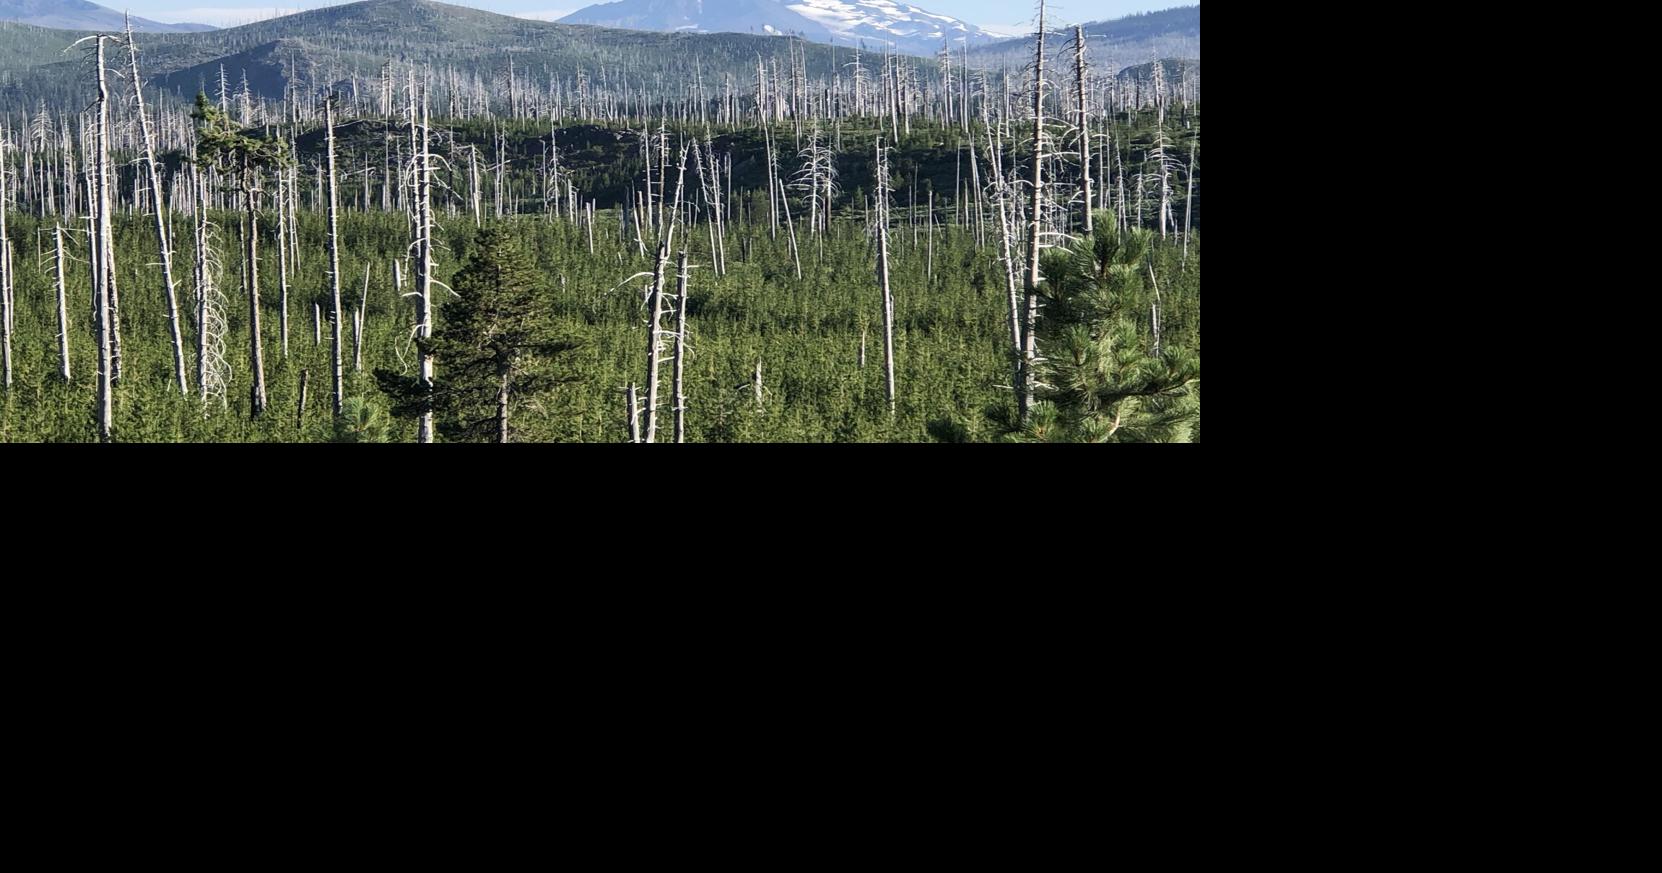 The future of northwest forests in a changing climate